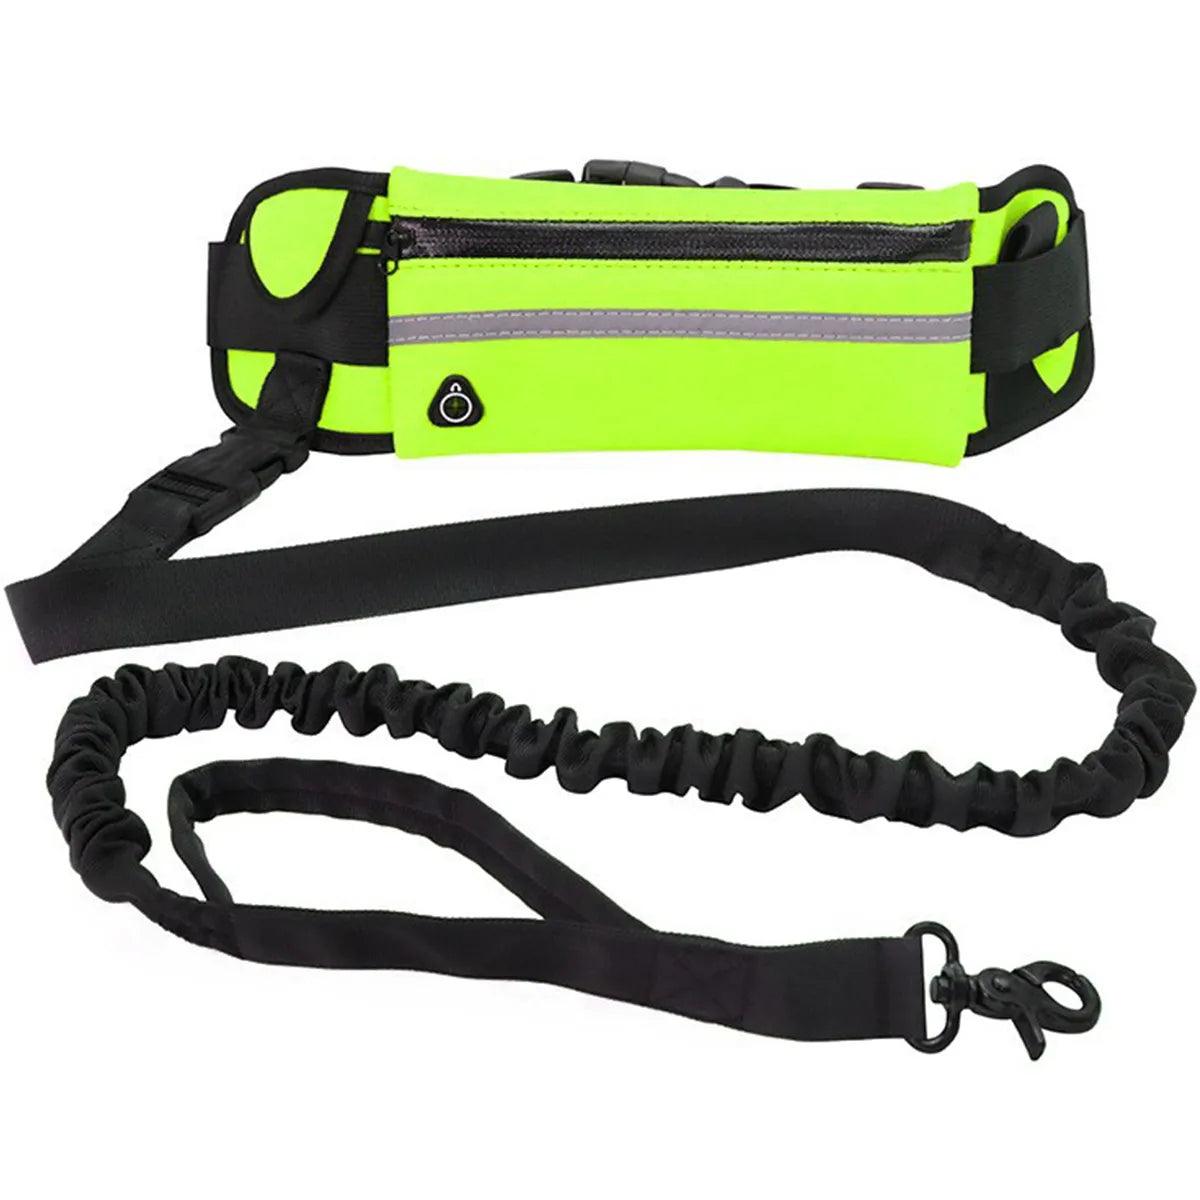 Hands Free Dog Leash for Running Walking Reflective Leash with Waist Bag Retractable Elastic Belt Dog Traction Rope Pet Products - Ammpoure Wellbeing